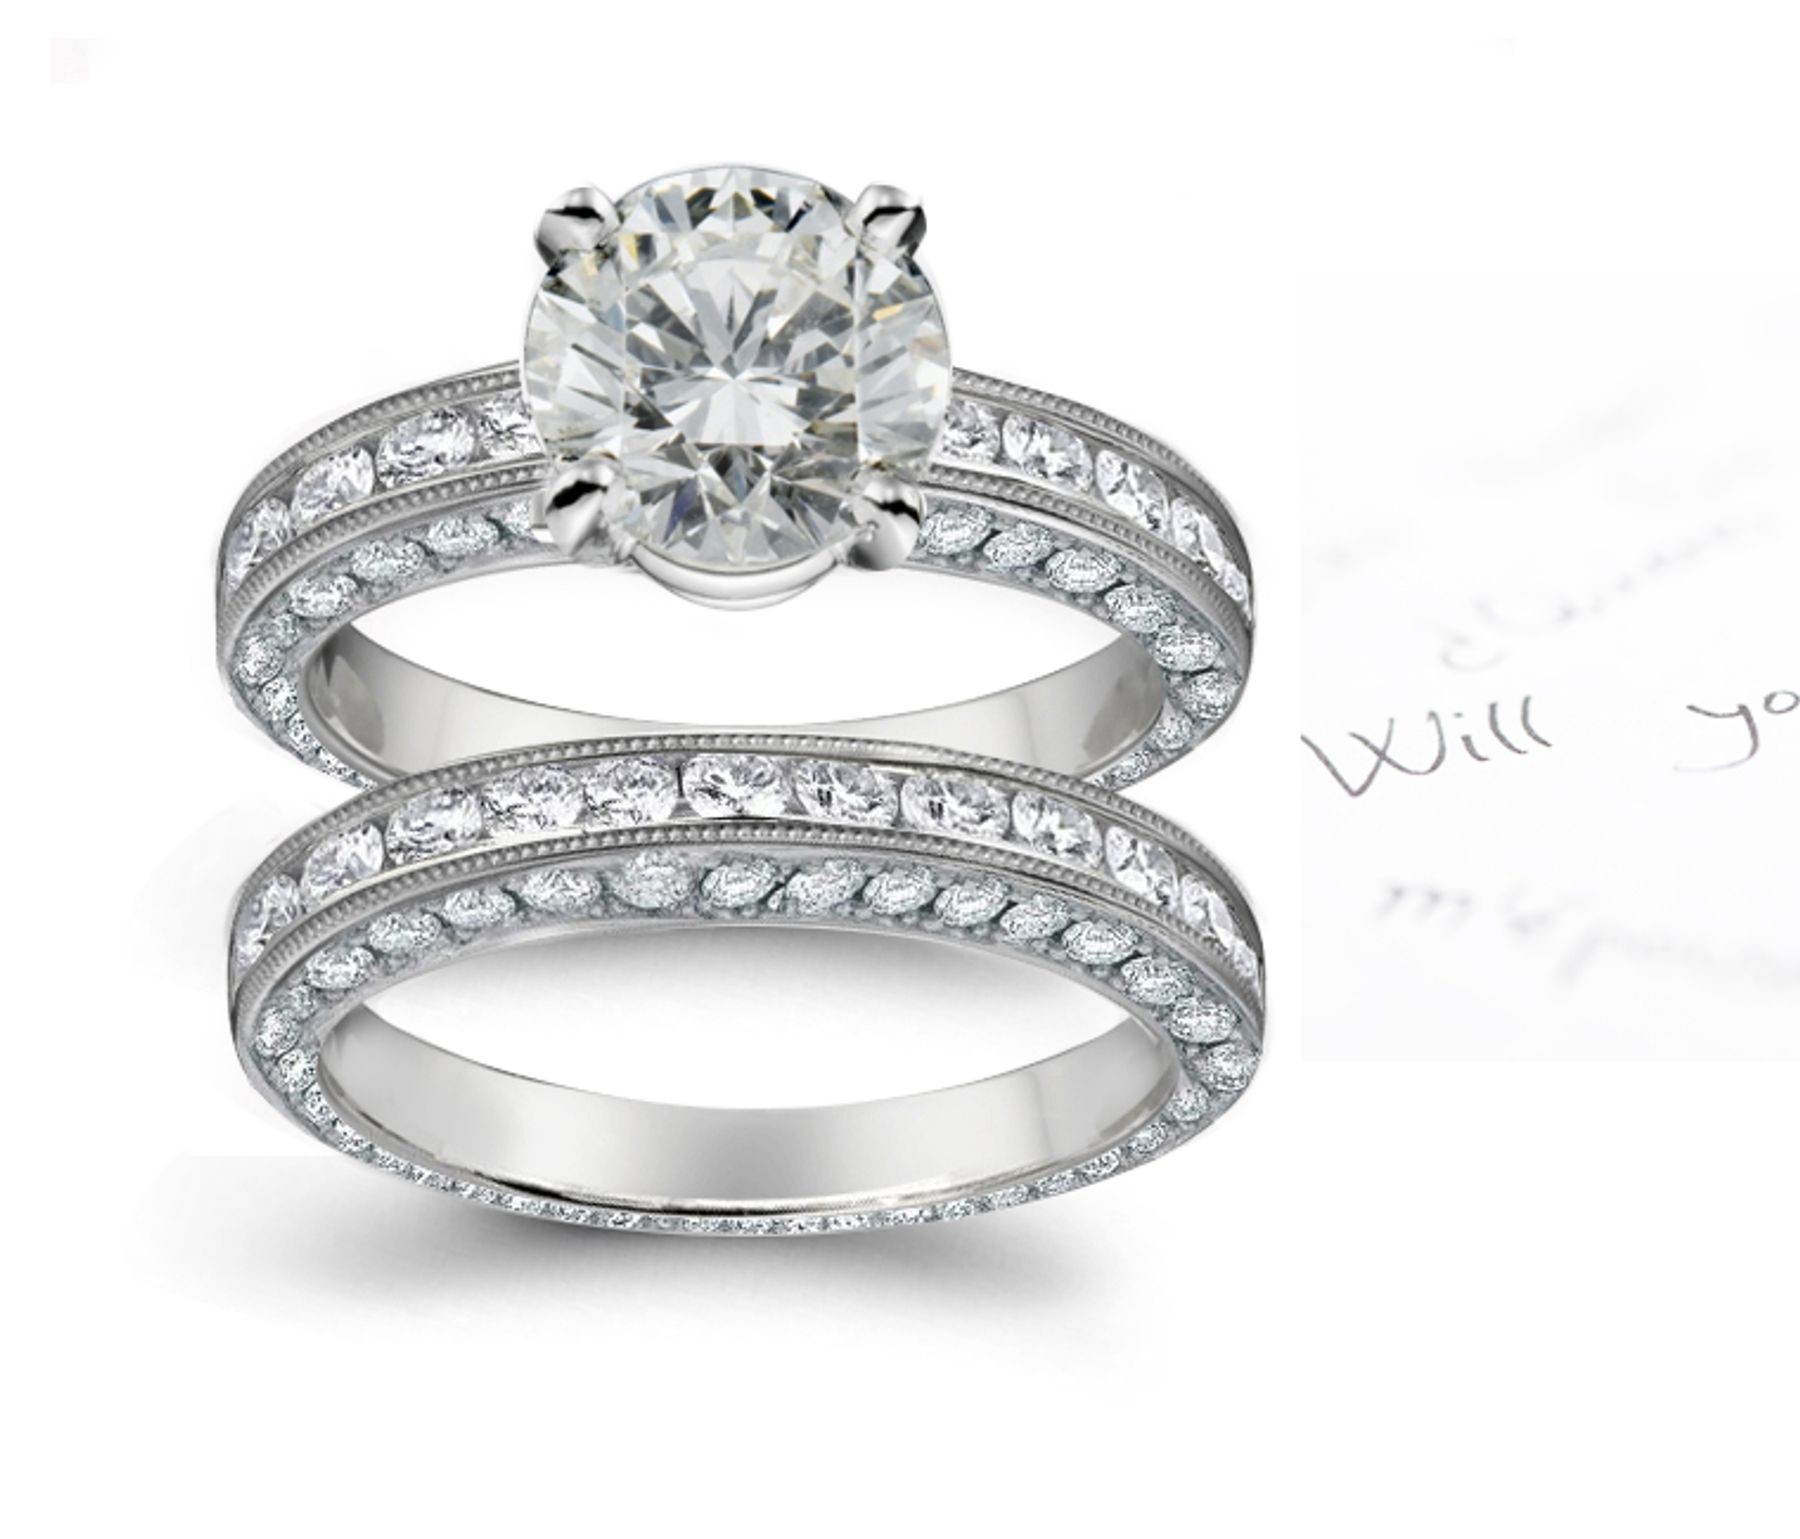 Finely Crafted Diamond Engagement Ring and Wedding Band & Diamond Halo Sides